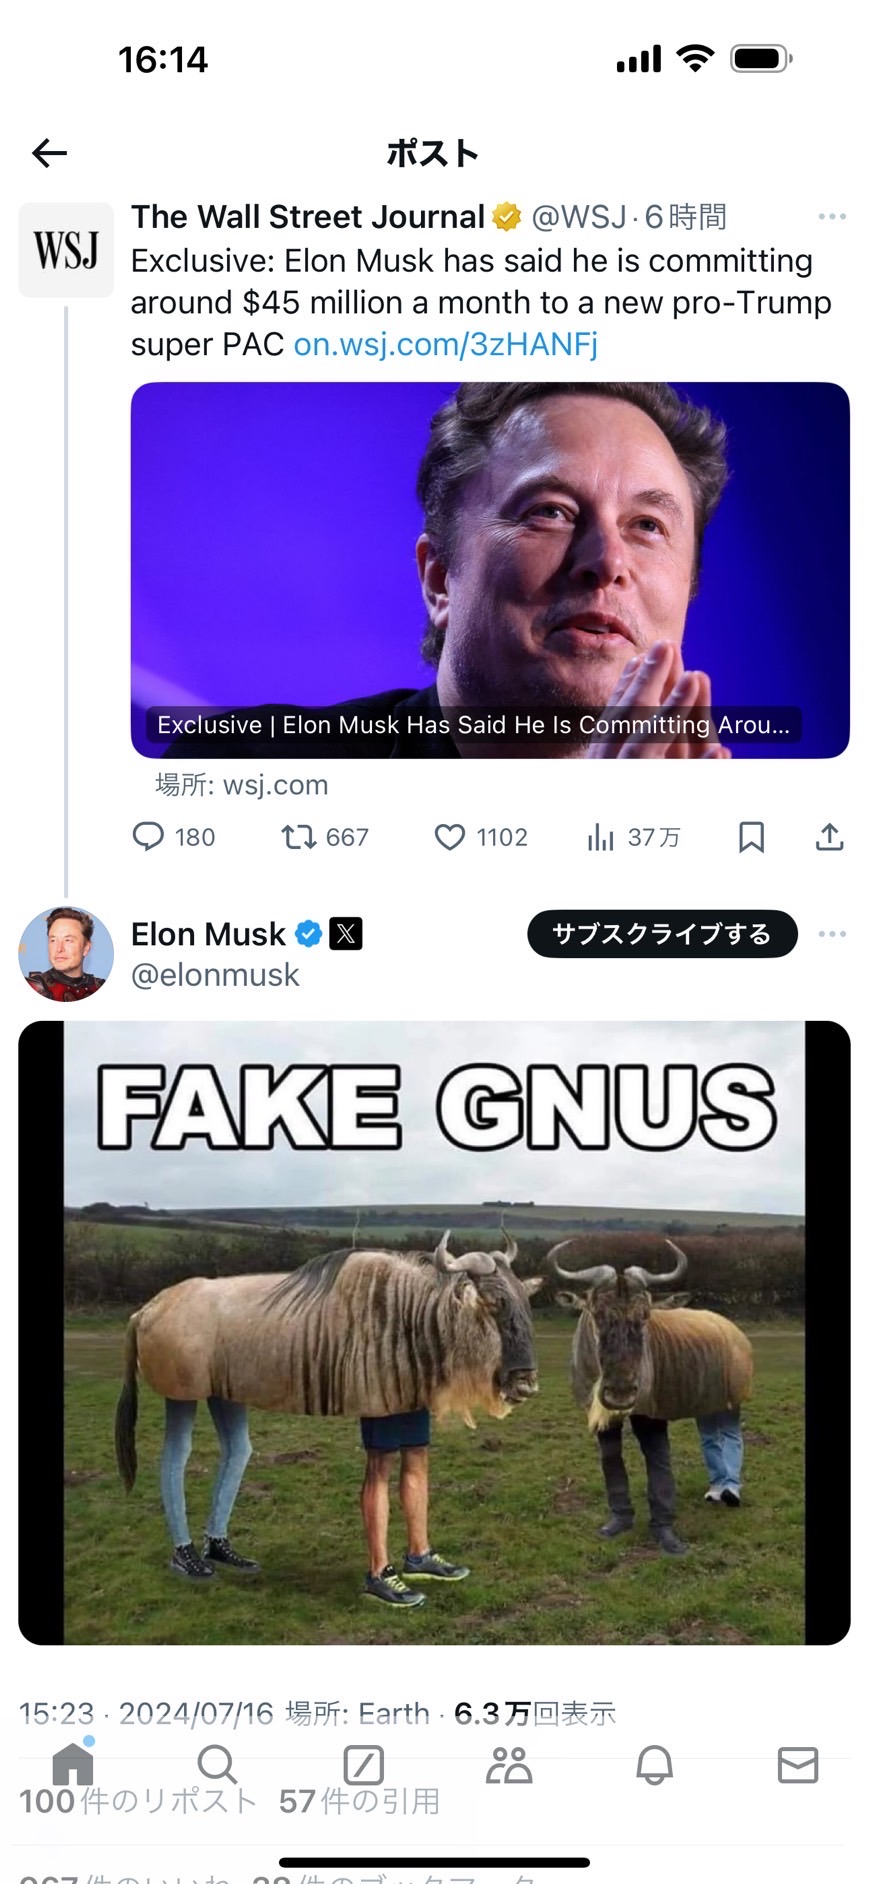 $Tesla (TSLA.US)$Even though Elon said to WSJ that it was fake news, the media is reporting it as it is.